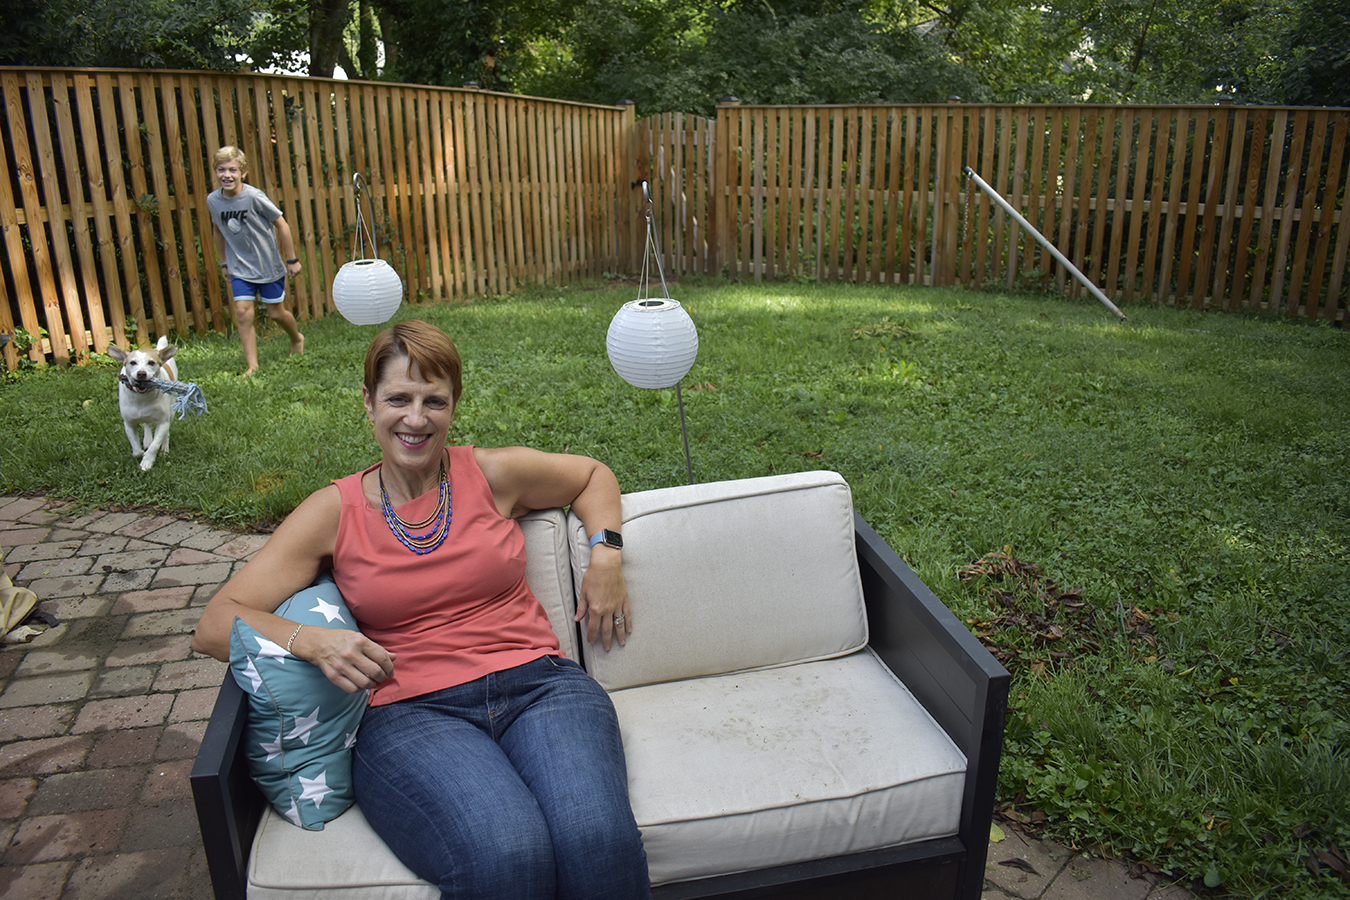 Angie Melton sits in her yard with son and dog playing outside